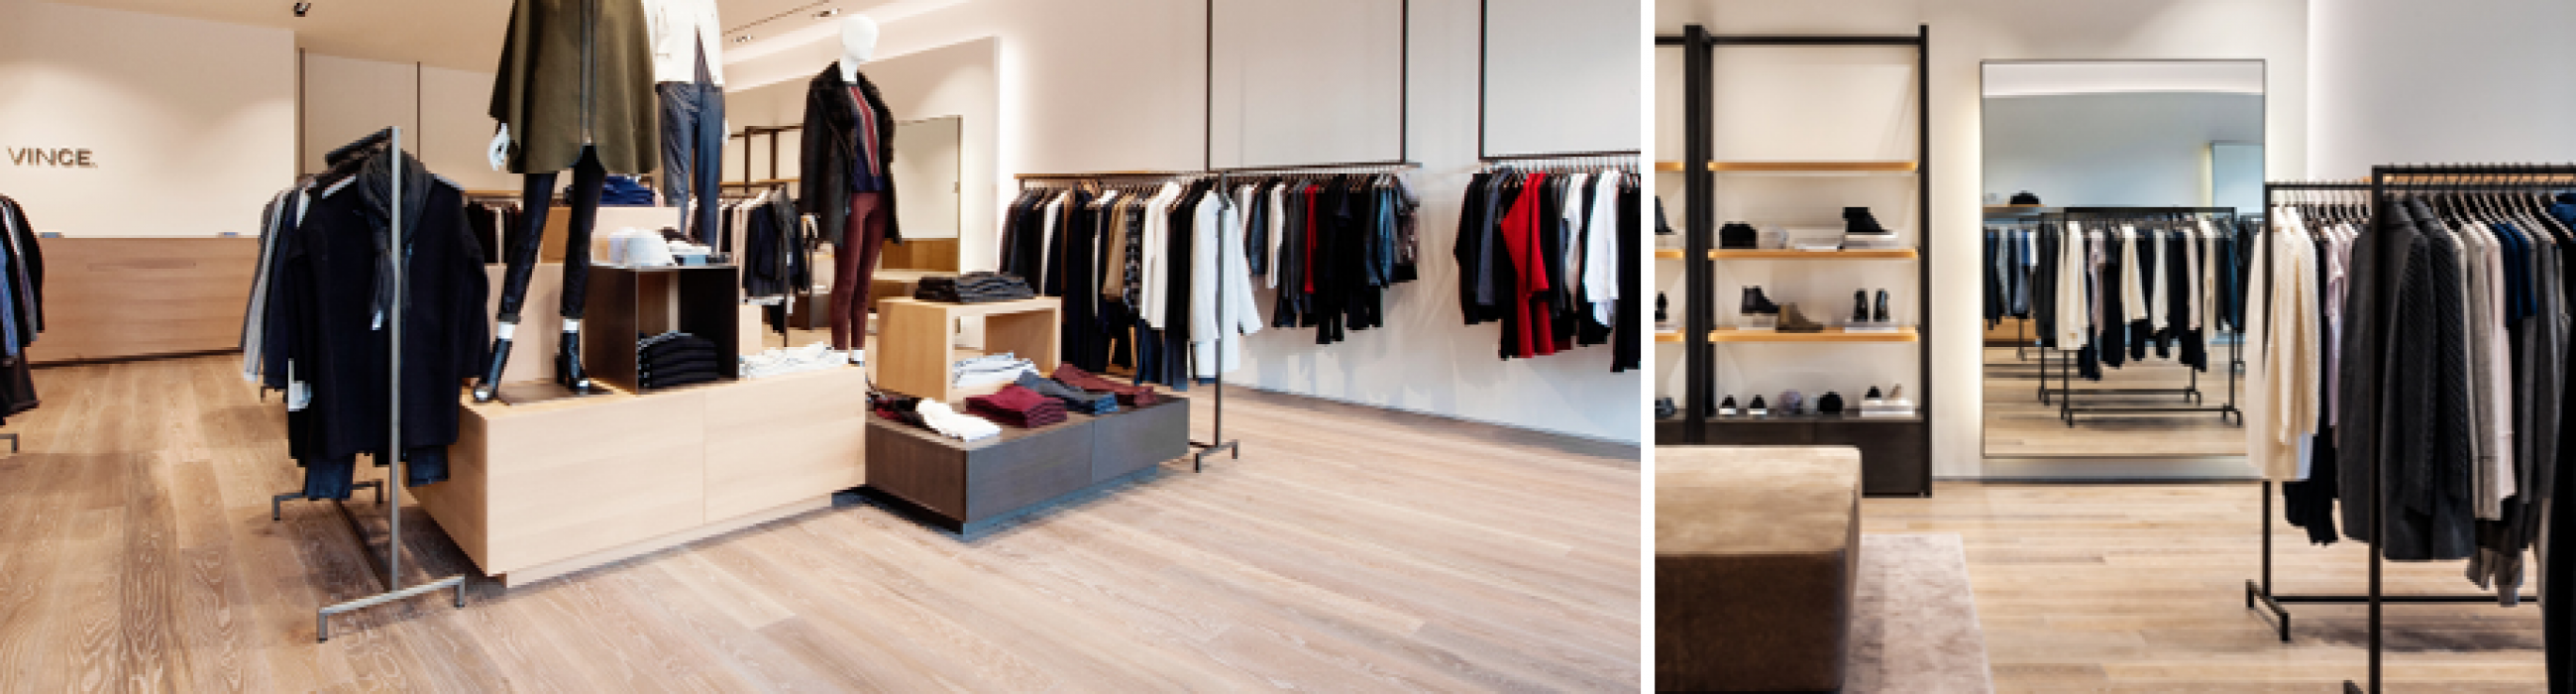 Engineered and Solid Flooring Installed at High End Retailer in NYC